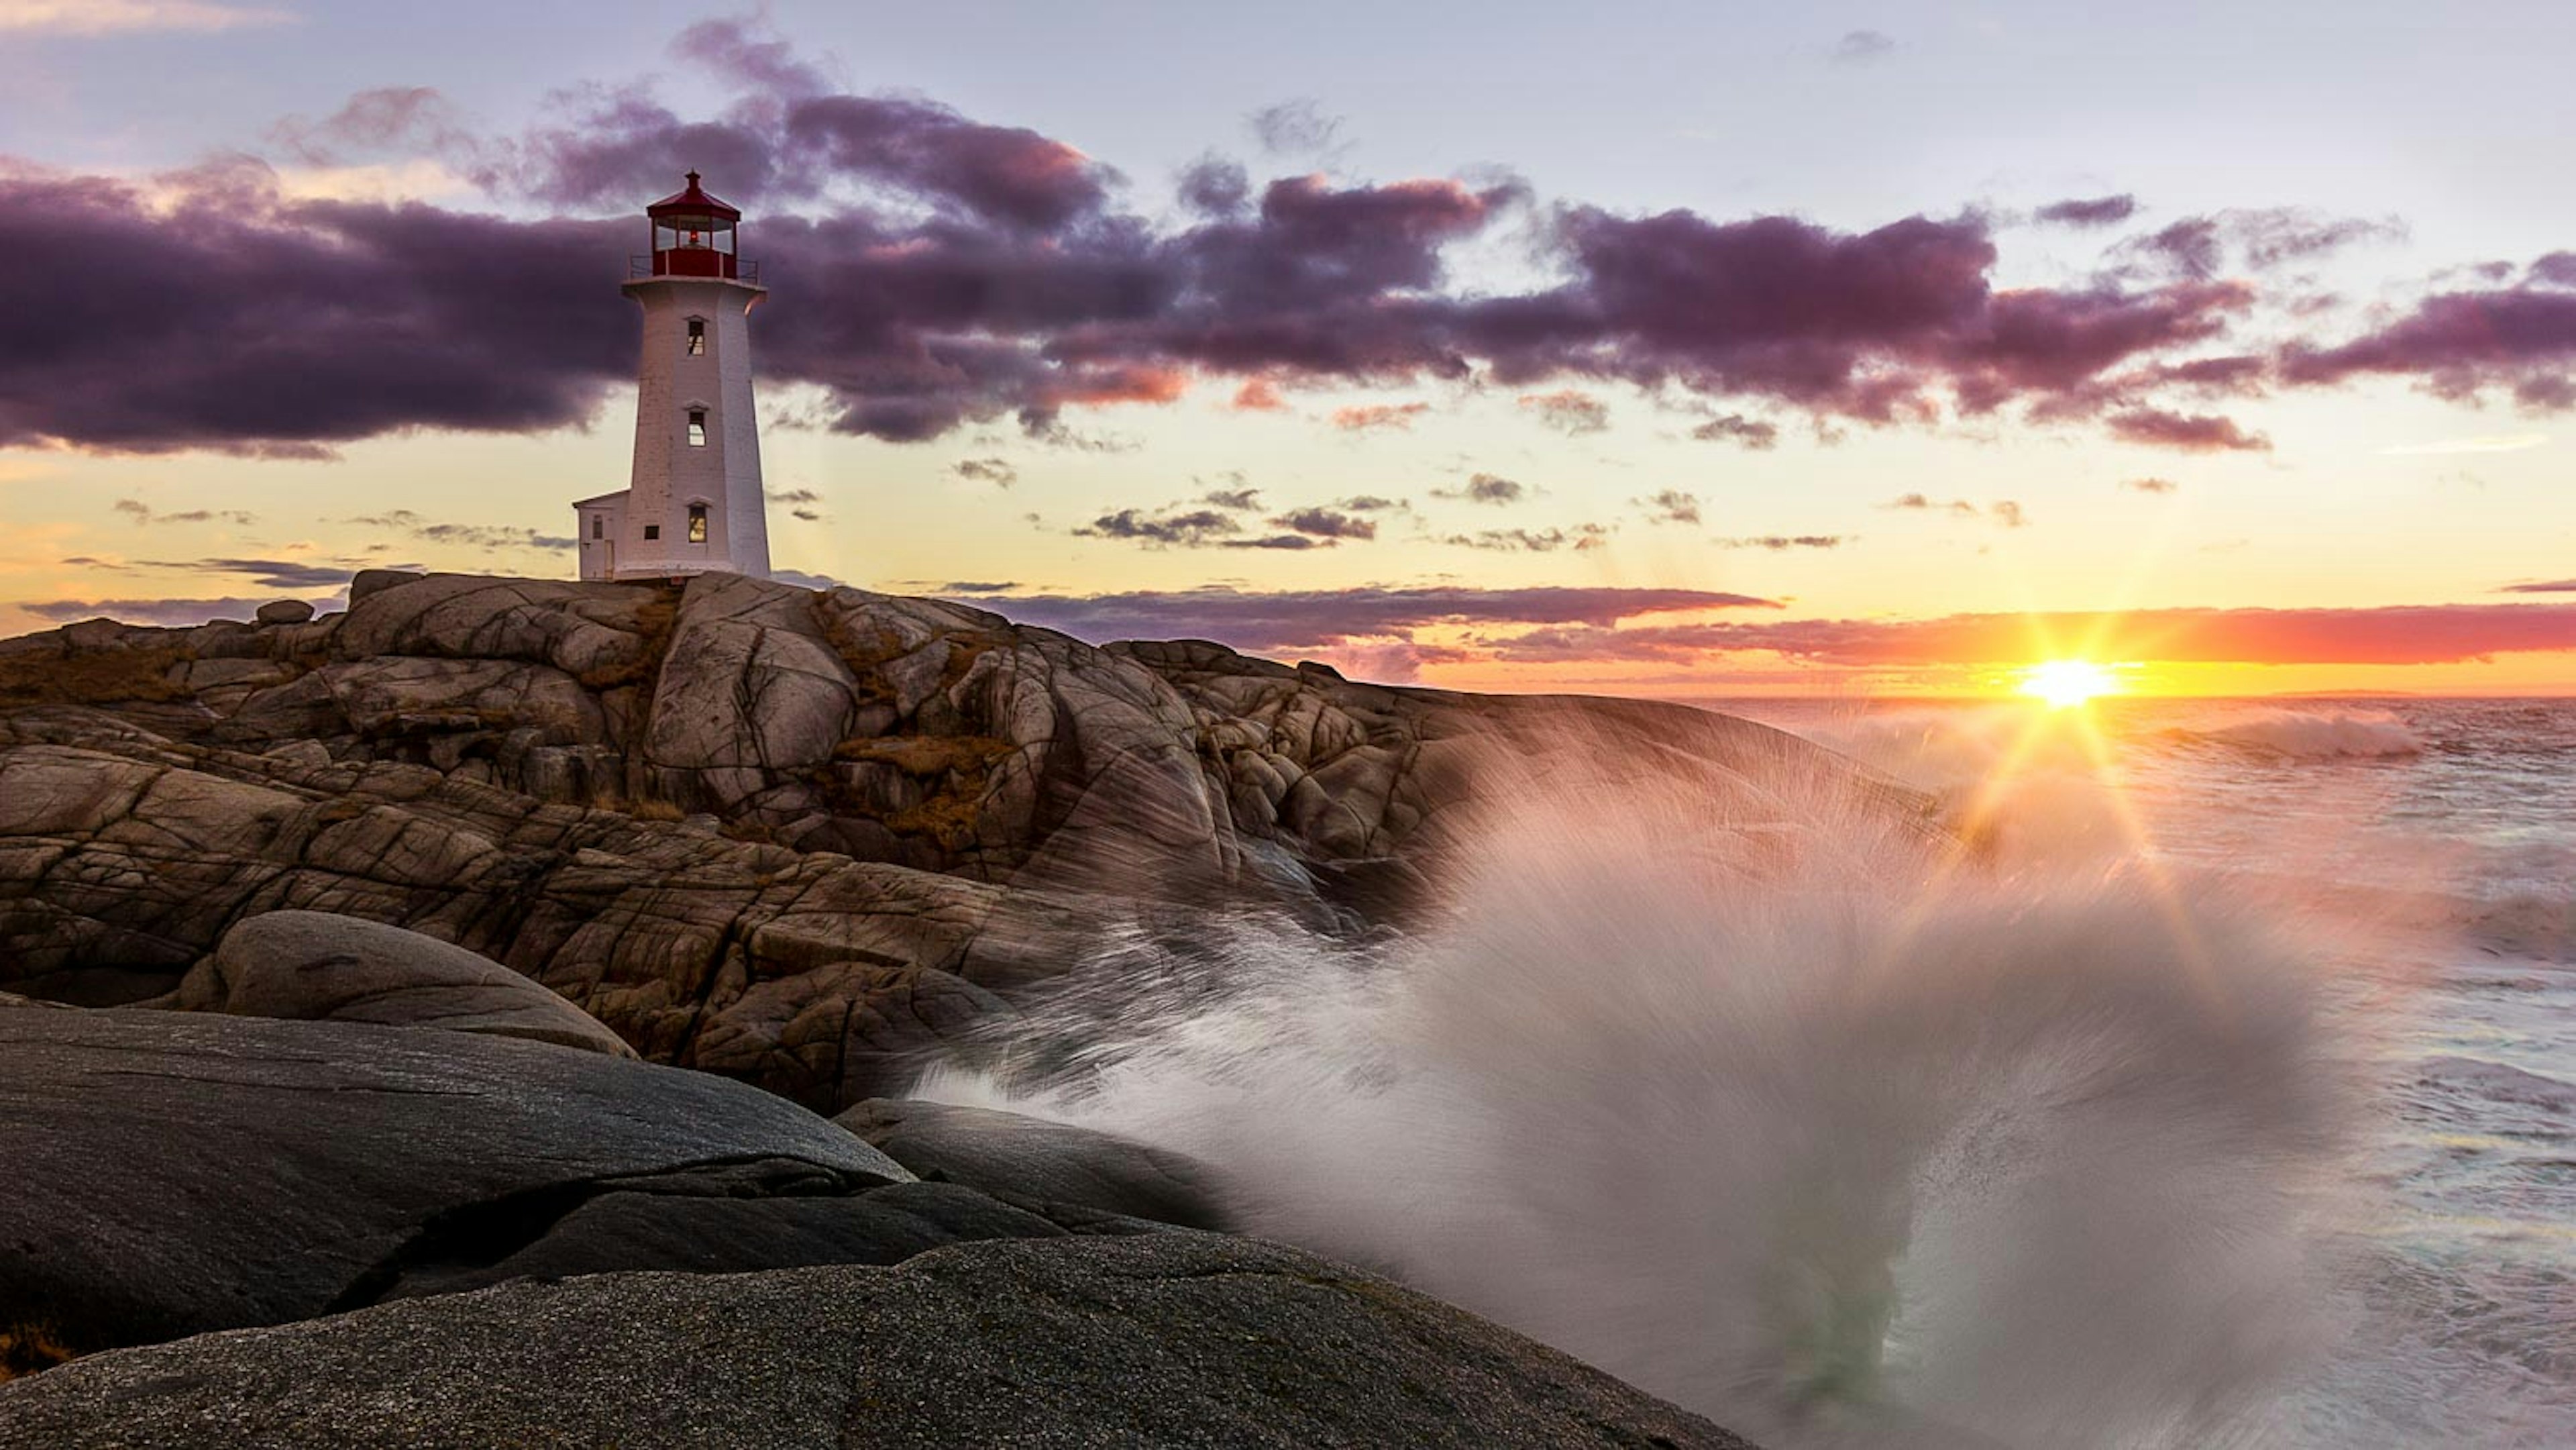 Waves crashing beneath the lighthouse at Peggy's Cove © Johnathan Rhynold / 500px